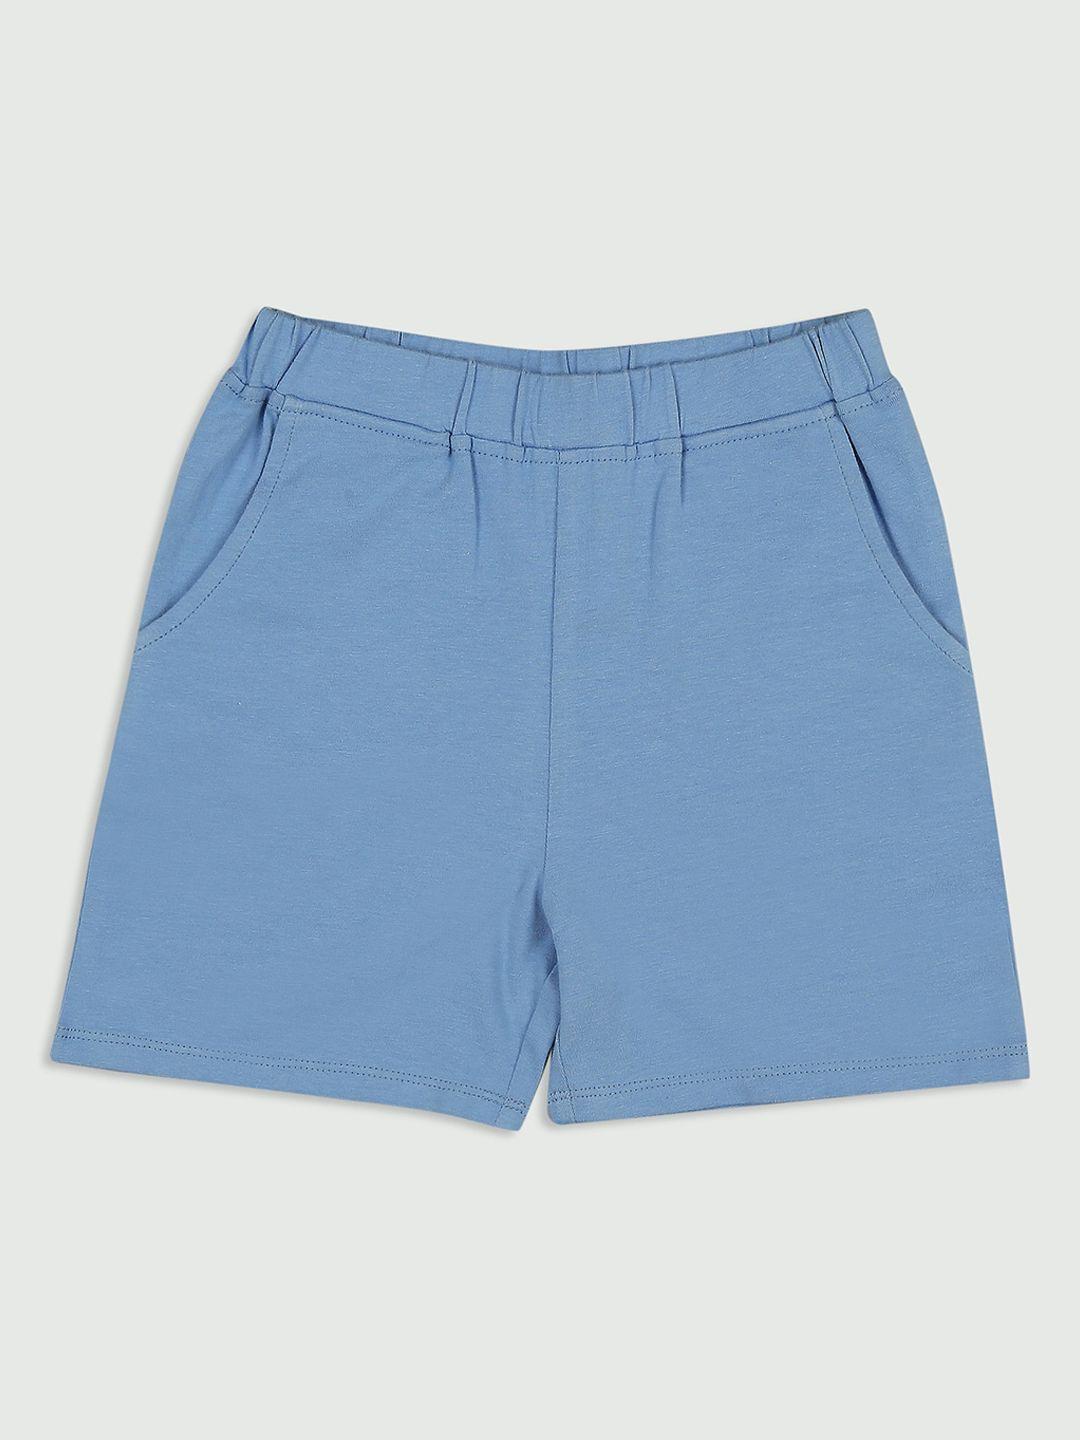 ola! otter kids antimicrobial cotton shorts